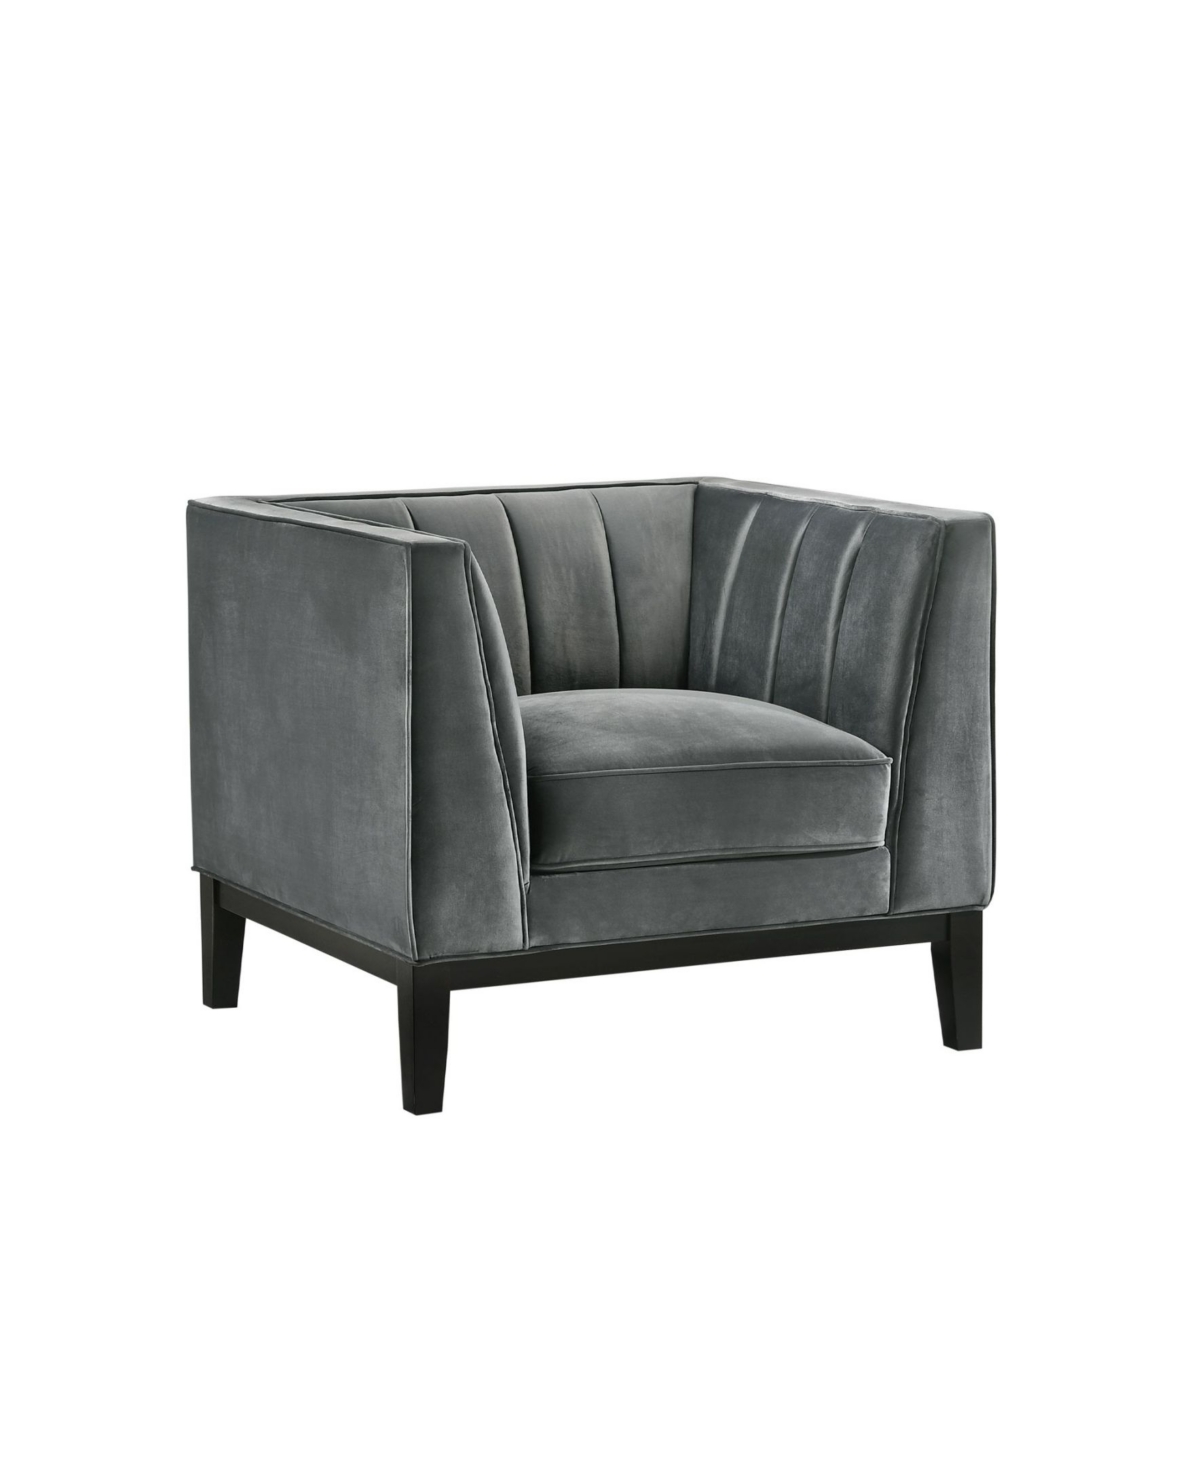 Picket House Furnishings Calabasas Chair In Light Gray